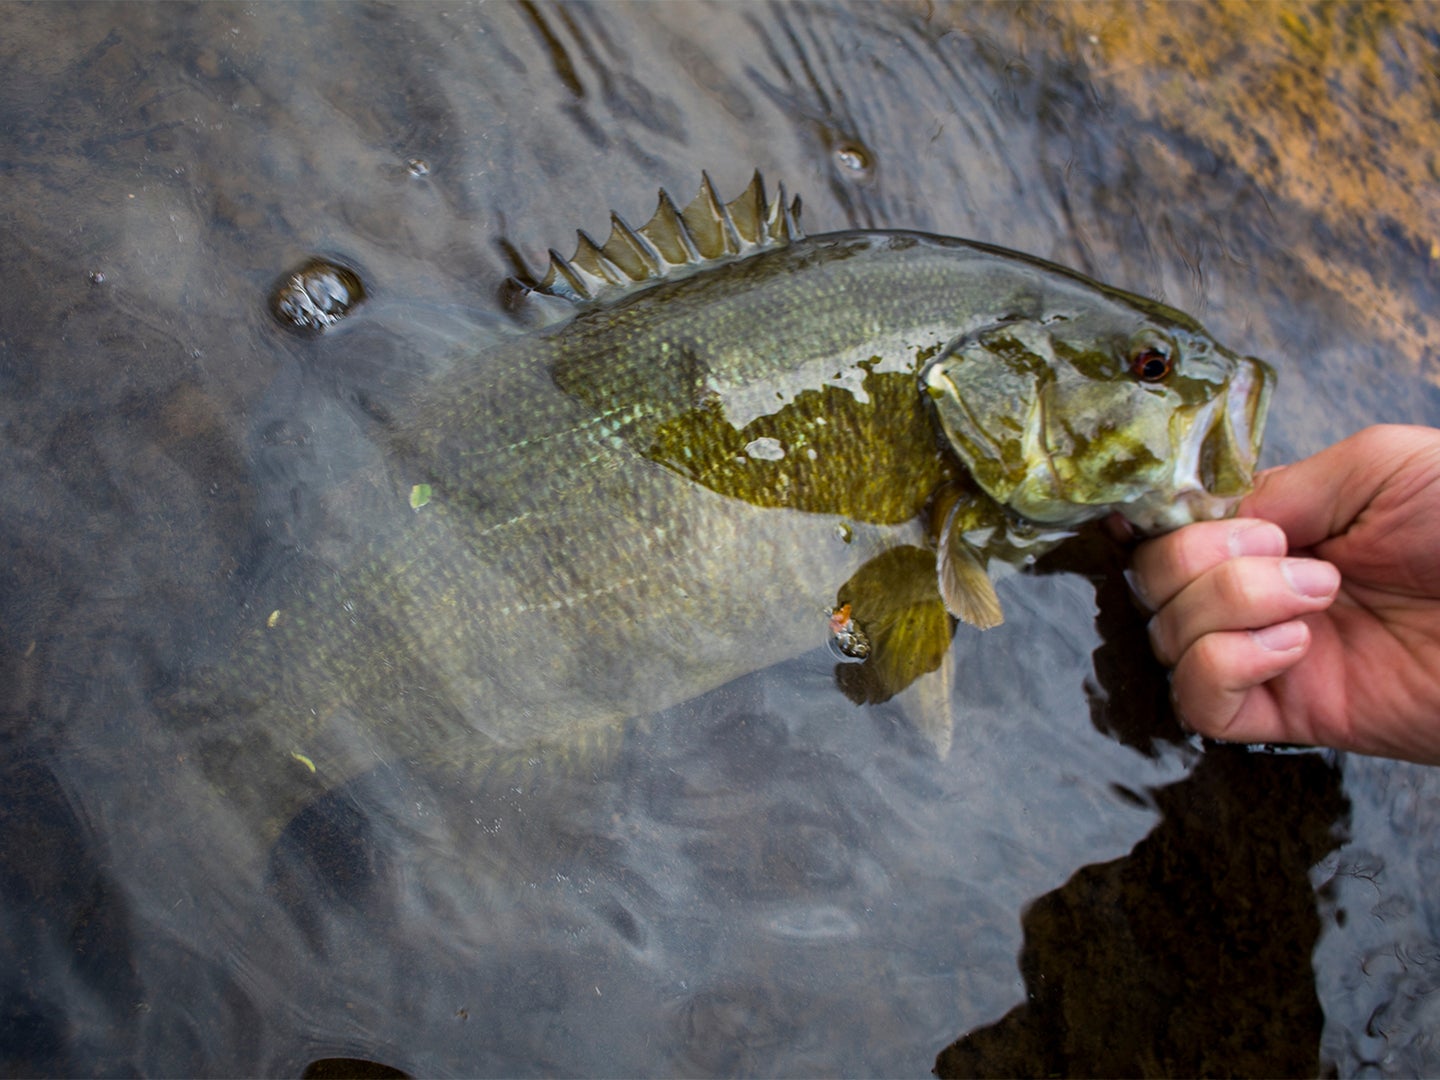 A smallmouth bass being pulled from the water.